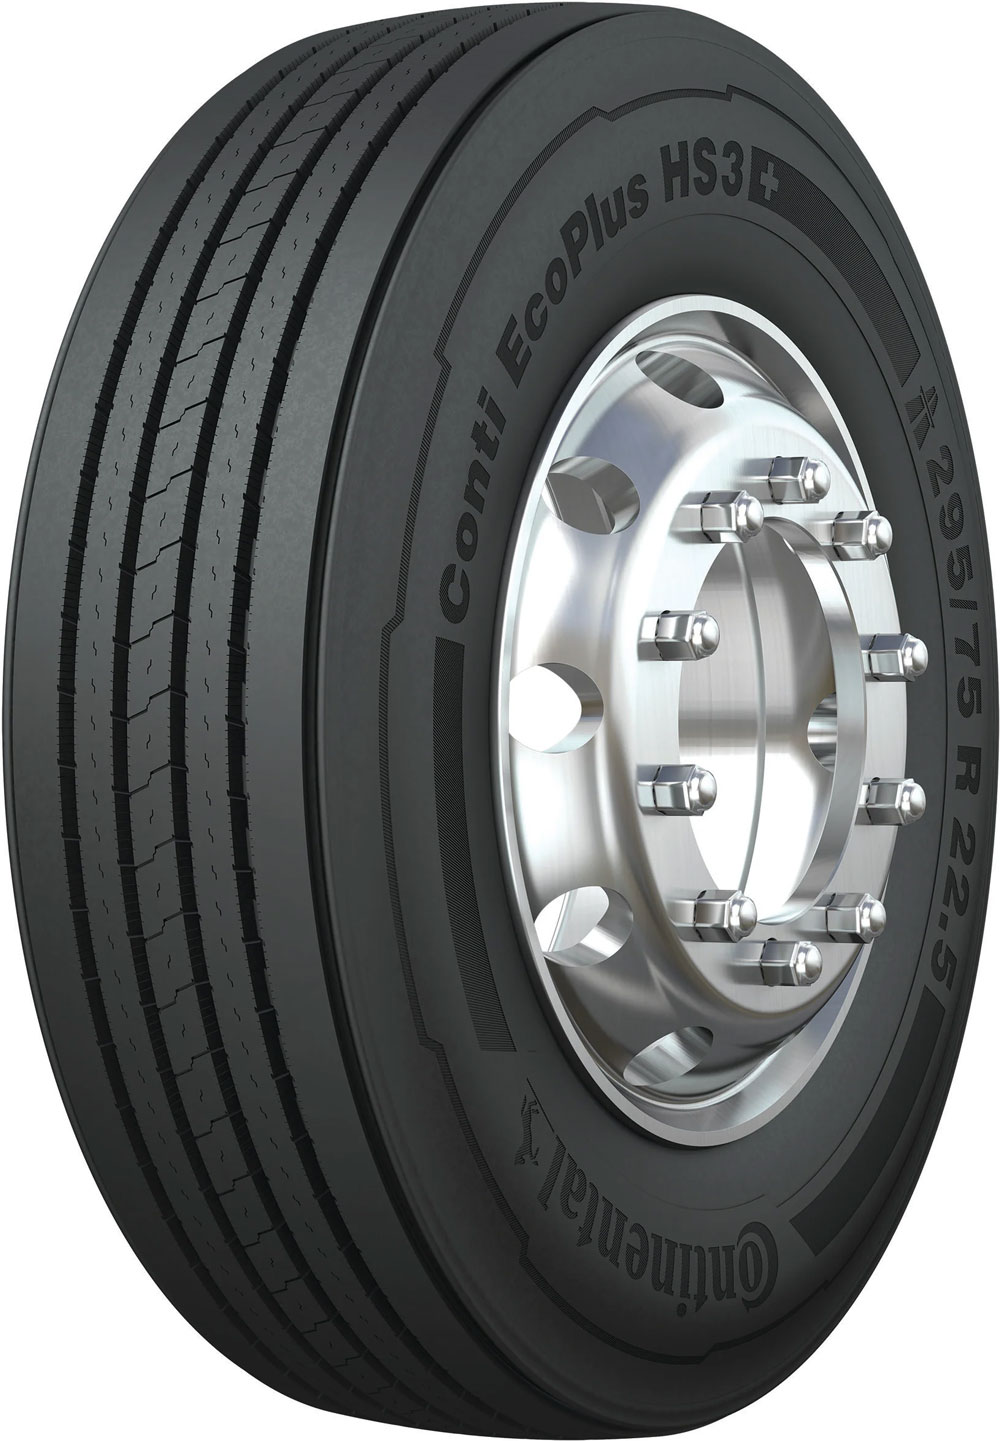 product_type-heavy_tires CONTINENTAL EcoPlus HS3+ 20 TL 315/60 R22.5 154L